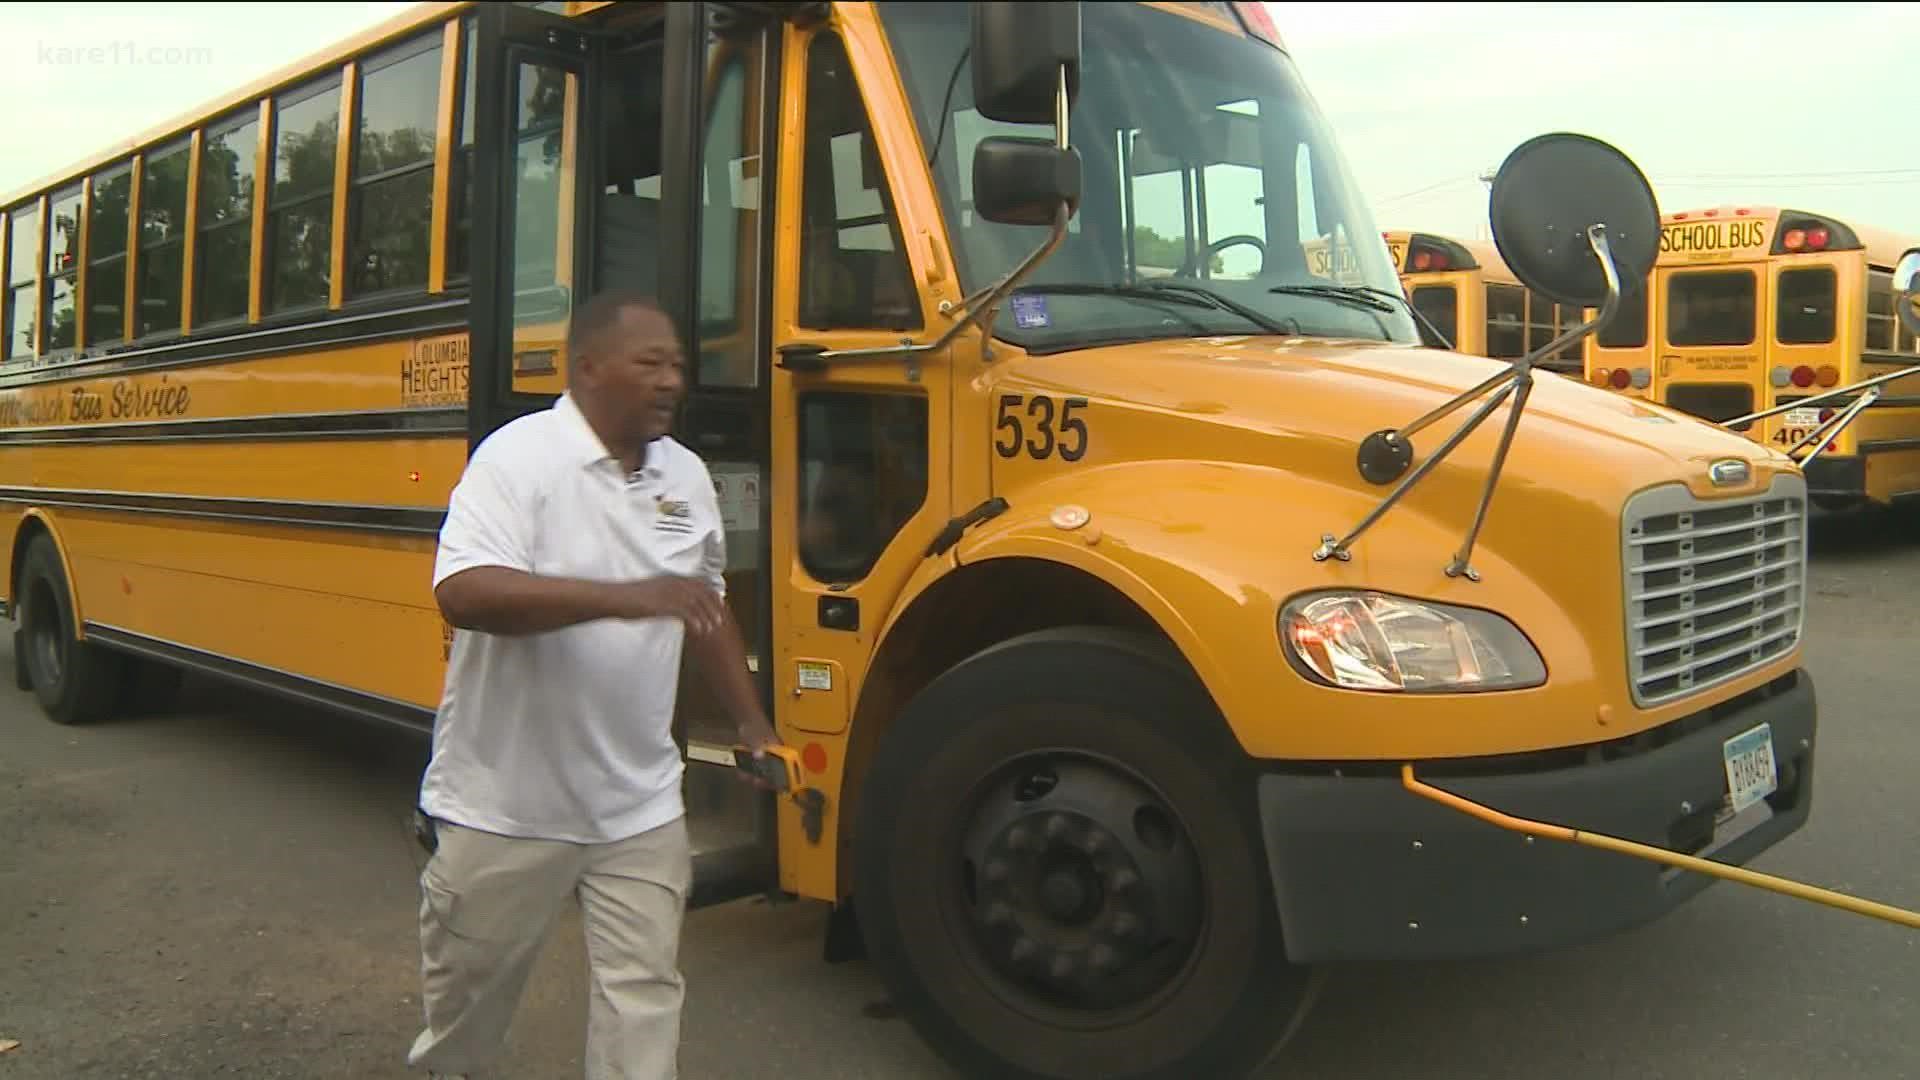 Veteran school bus driver Victor Smith of Monarch Bus Service explains the pros and cons of being a school driver.